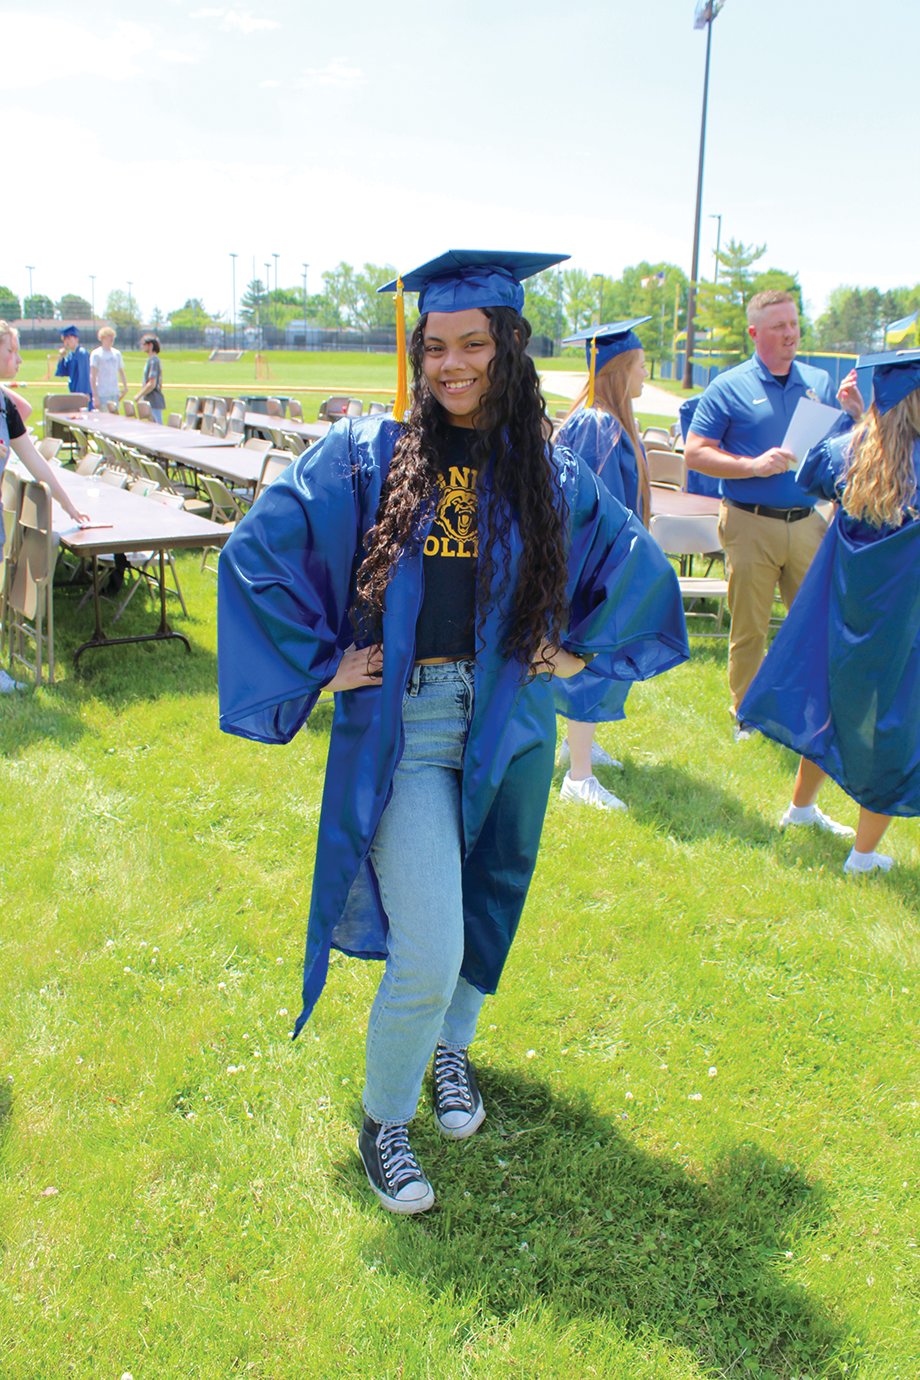 Crawfordsville senior Selena Starks strikes her best pose Tuesday as she and her fellow graduates embark on a journey through the district's elementary schools.